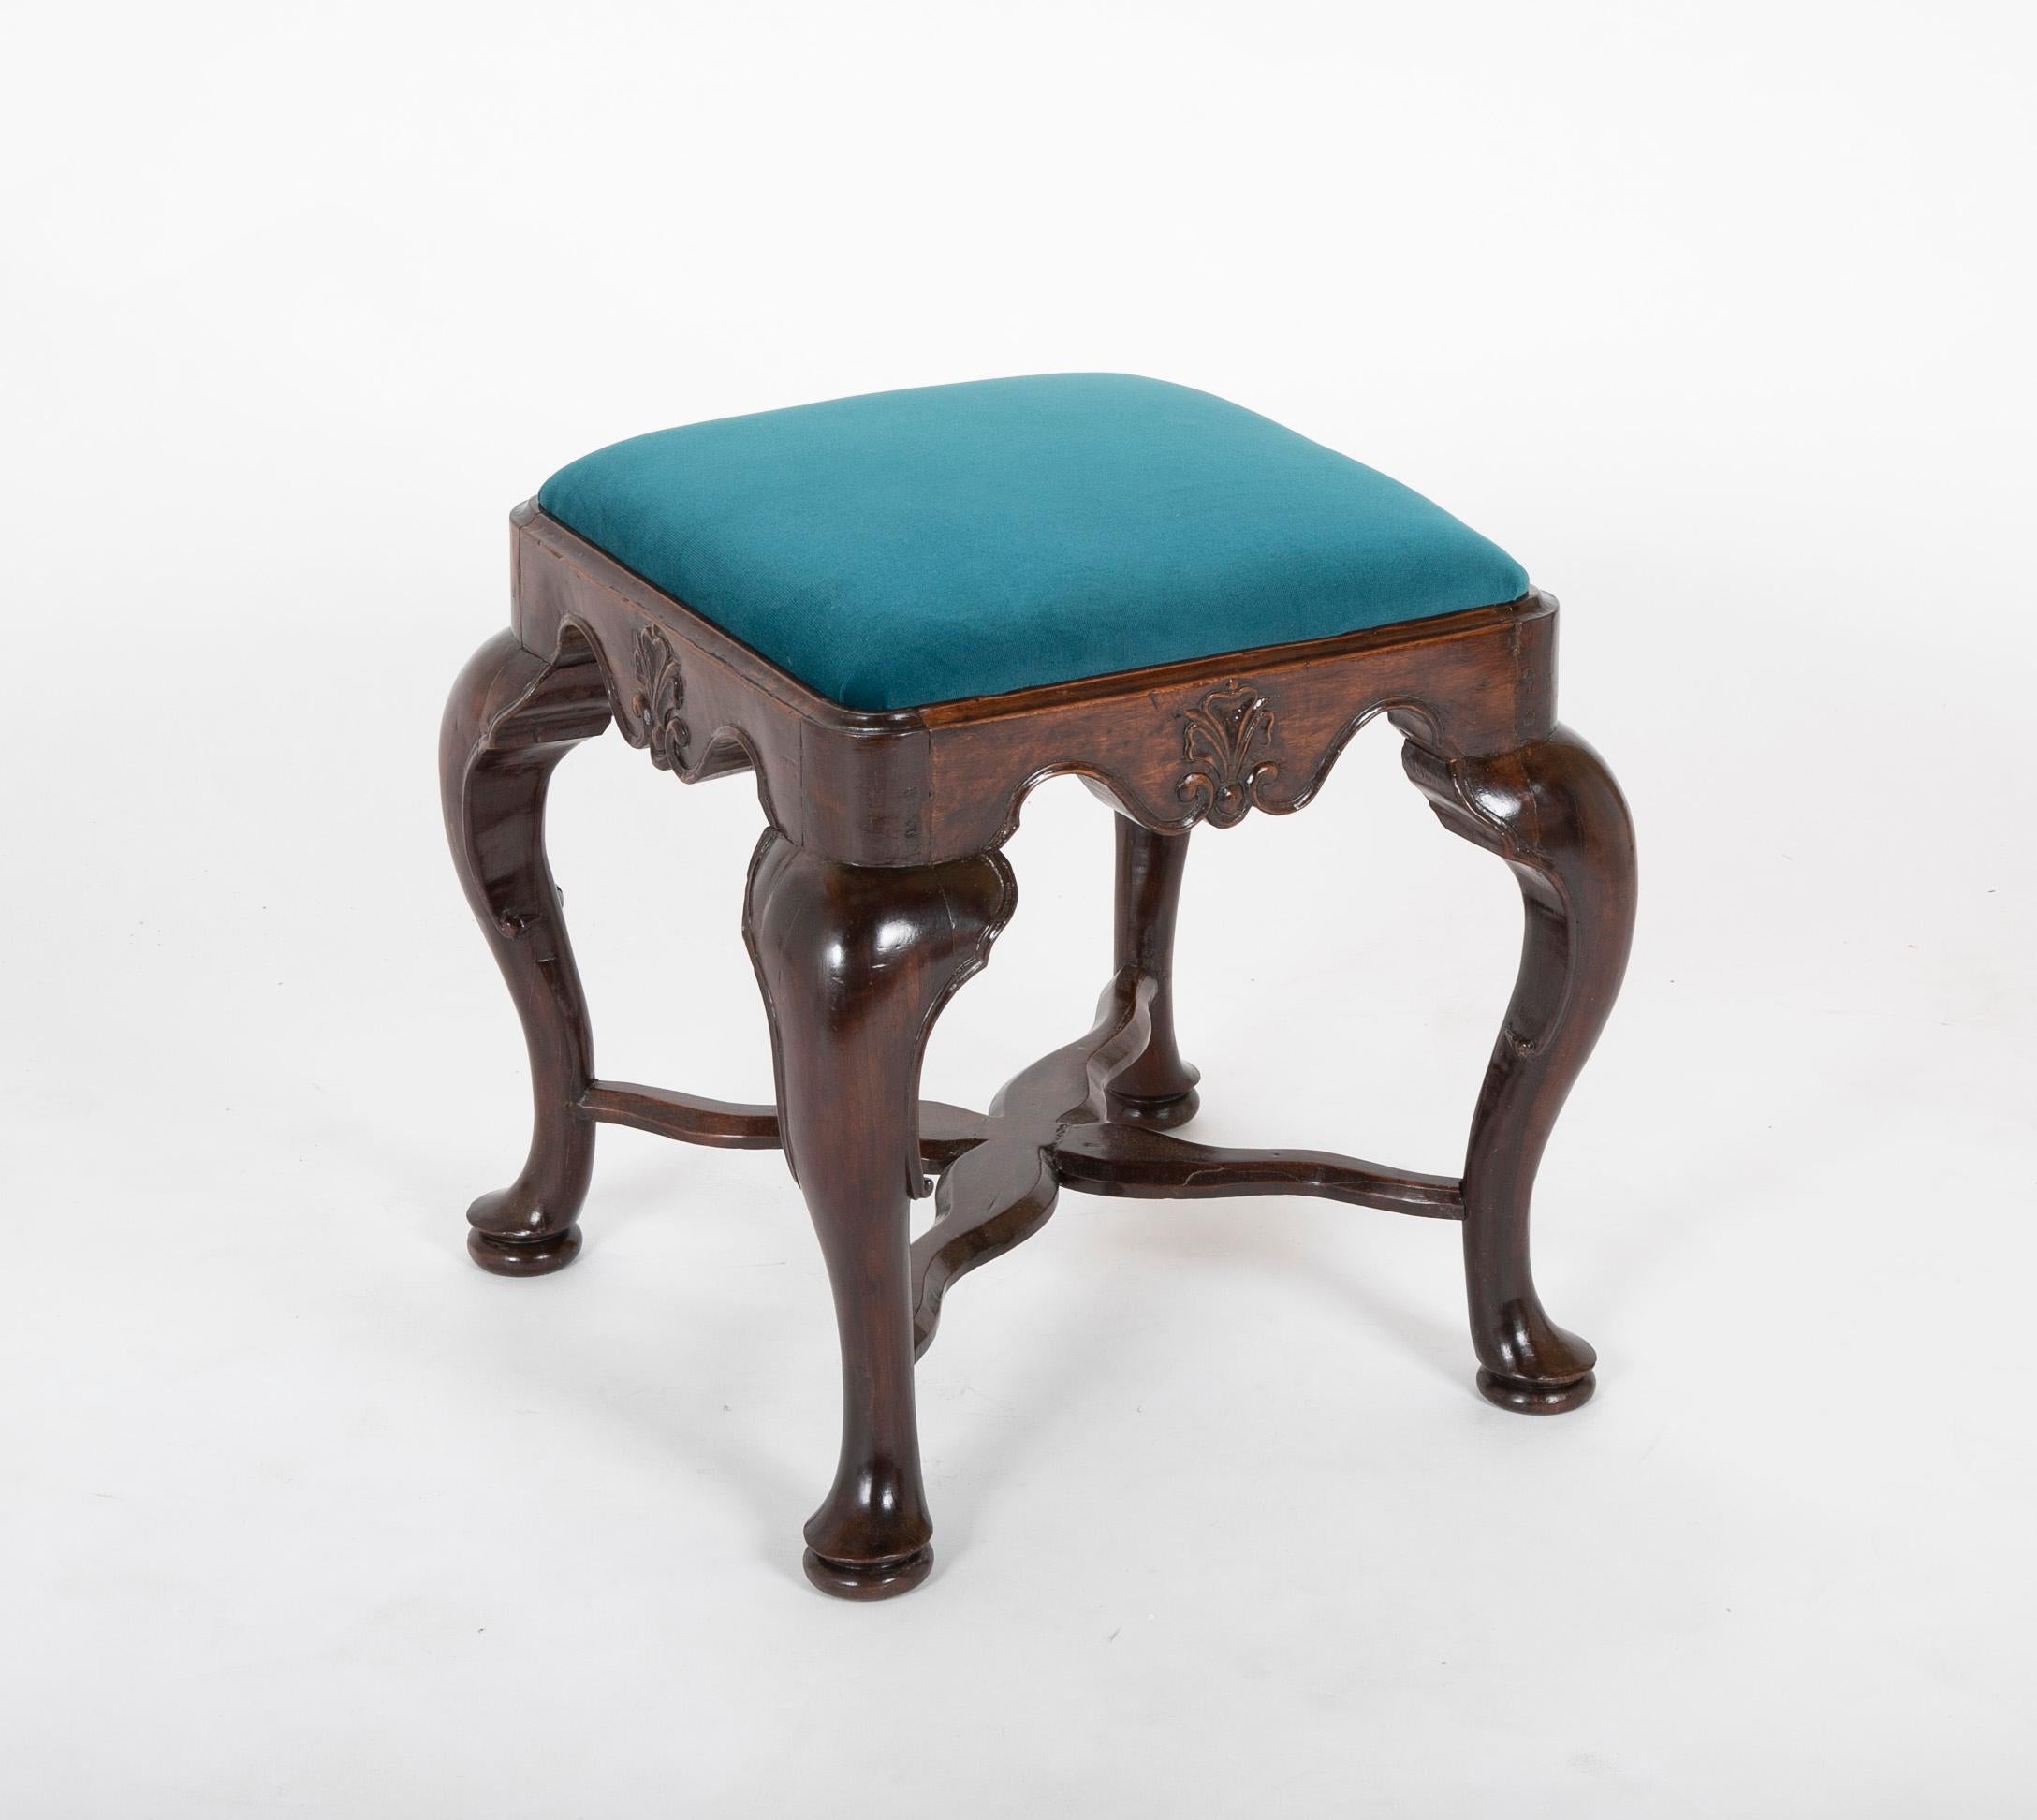 An early 18th century English George II deeply carved footstool.